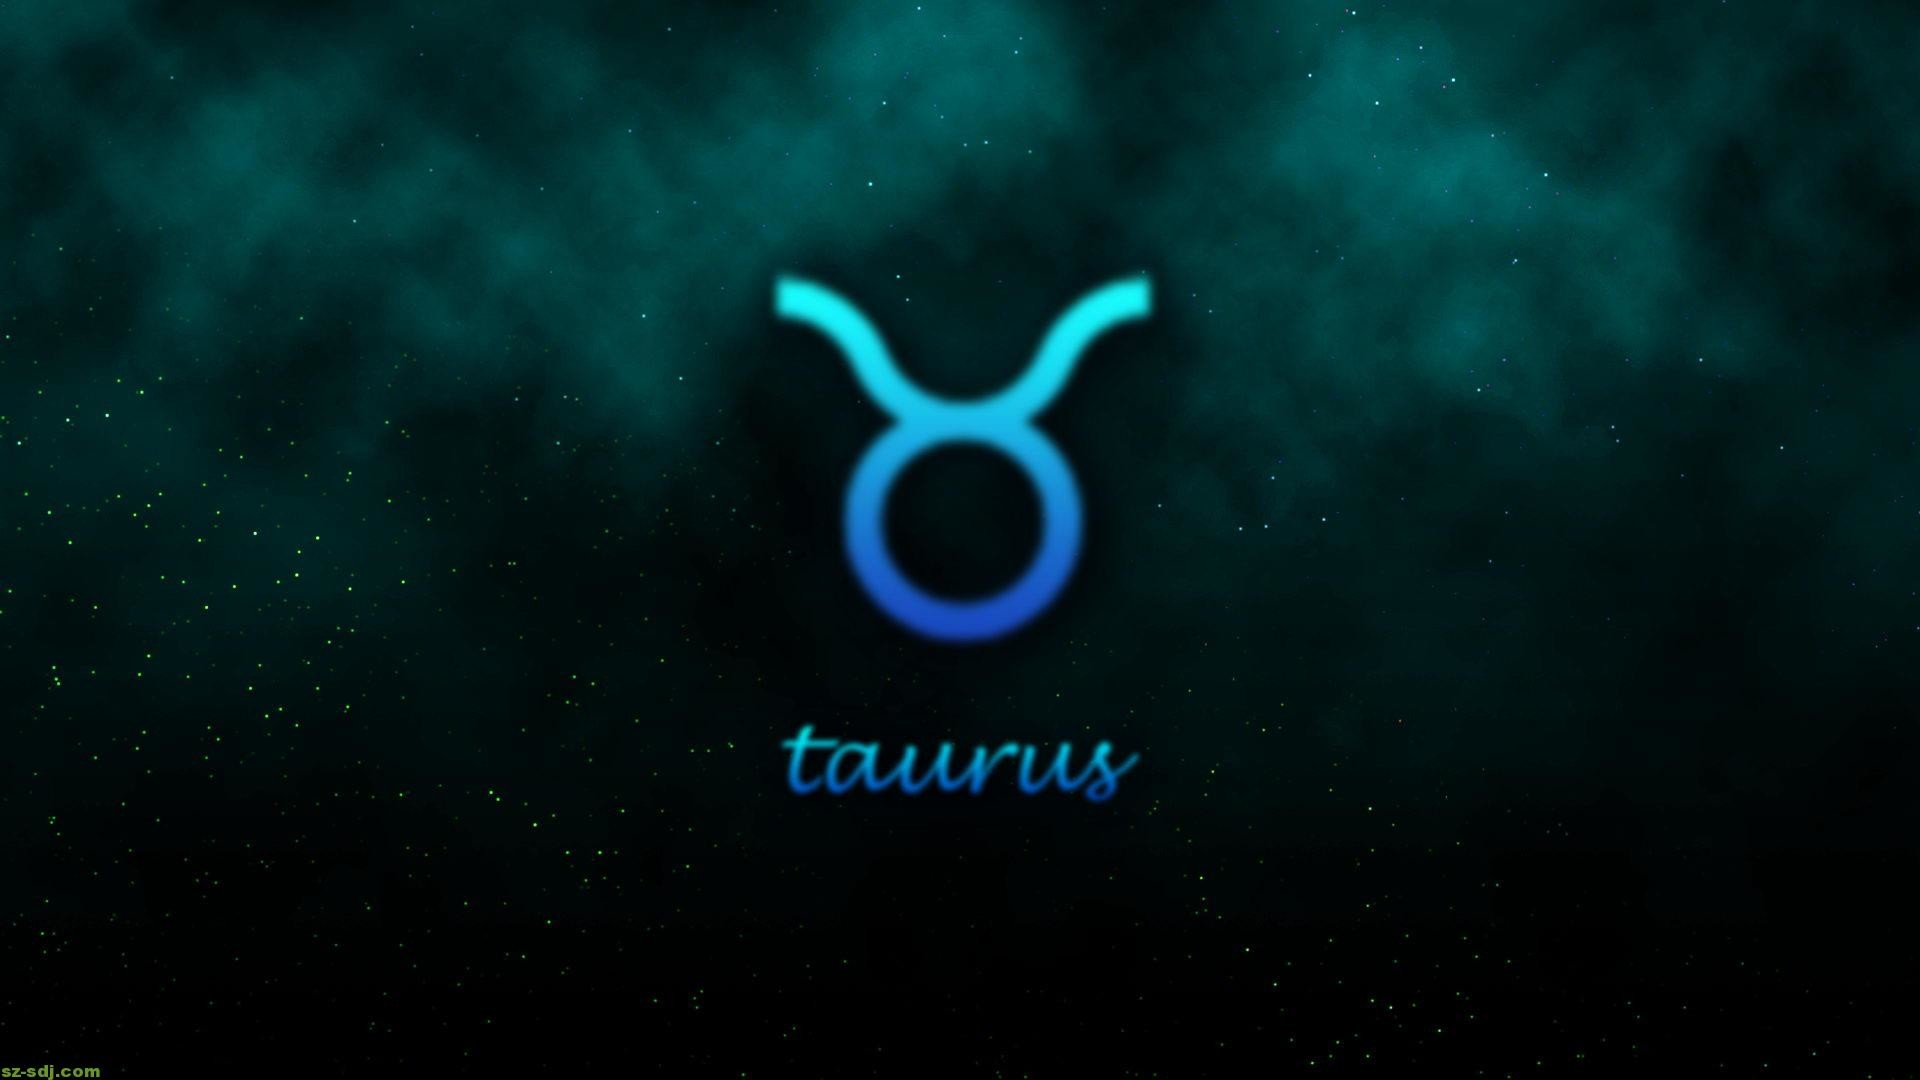 1920x1080 Zodiac Taurus Live Wallpaper - Android Apps on Google Play Taurus, Zodiac,  Horoscope and Astrology Signs - Meanings, Pictures .